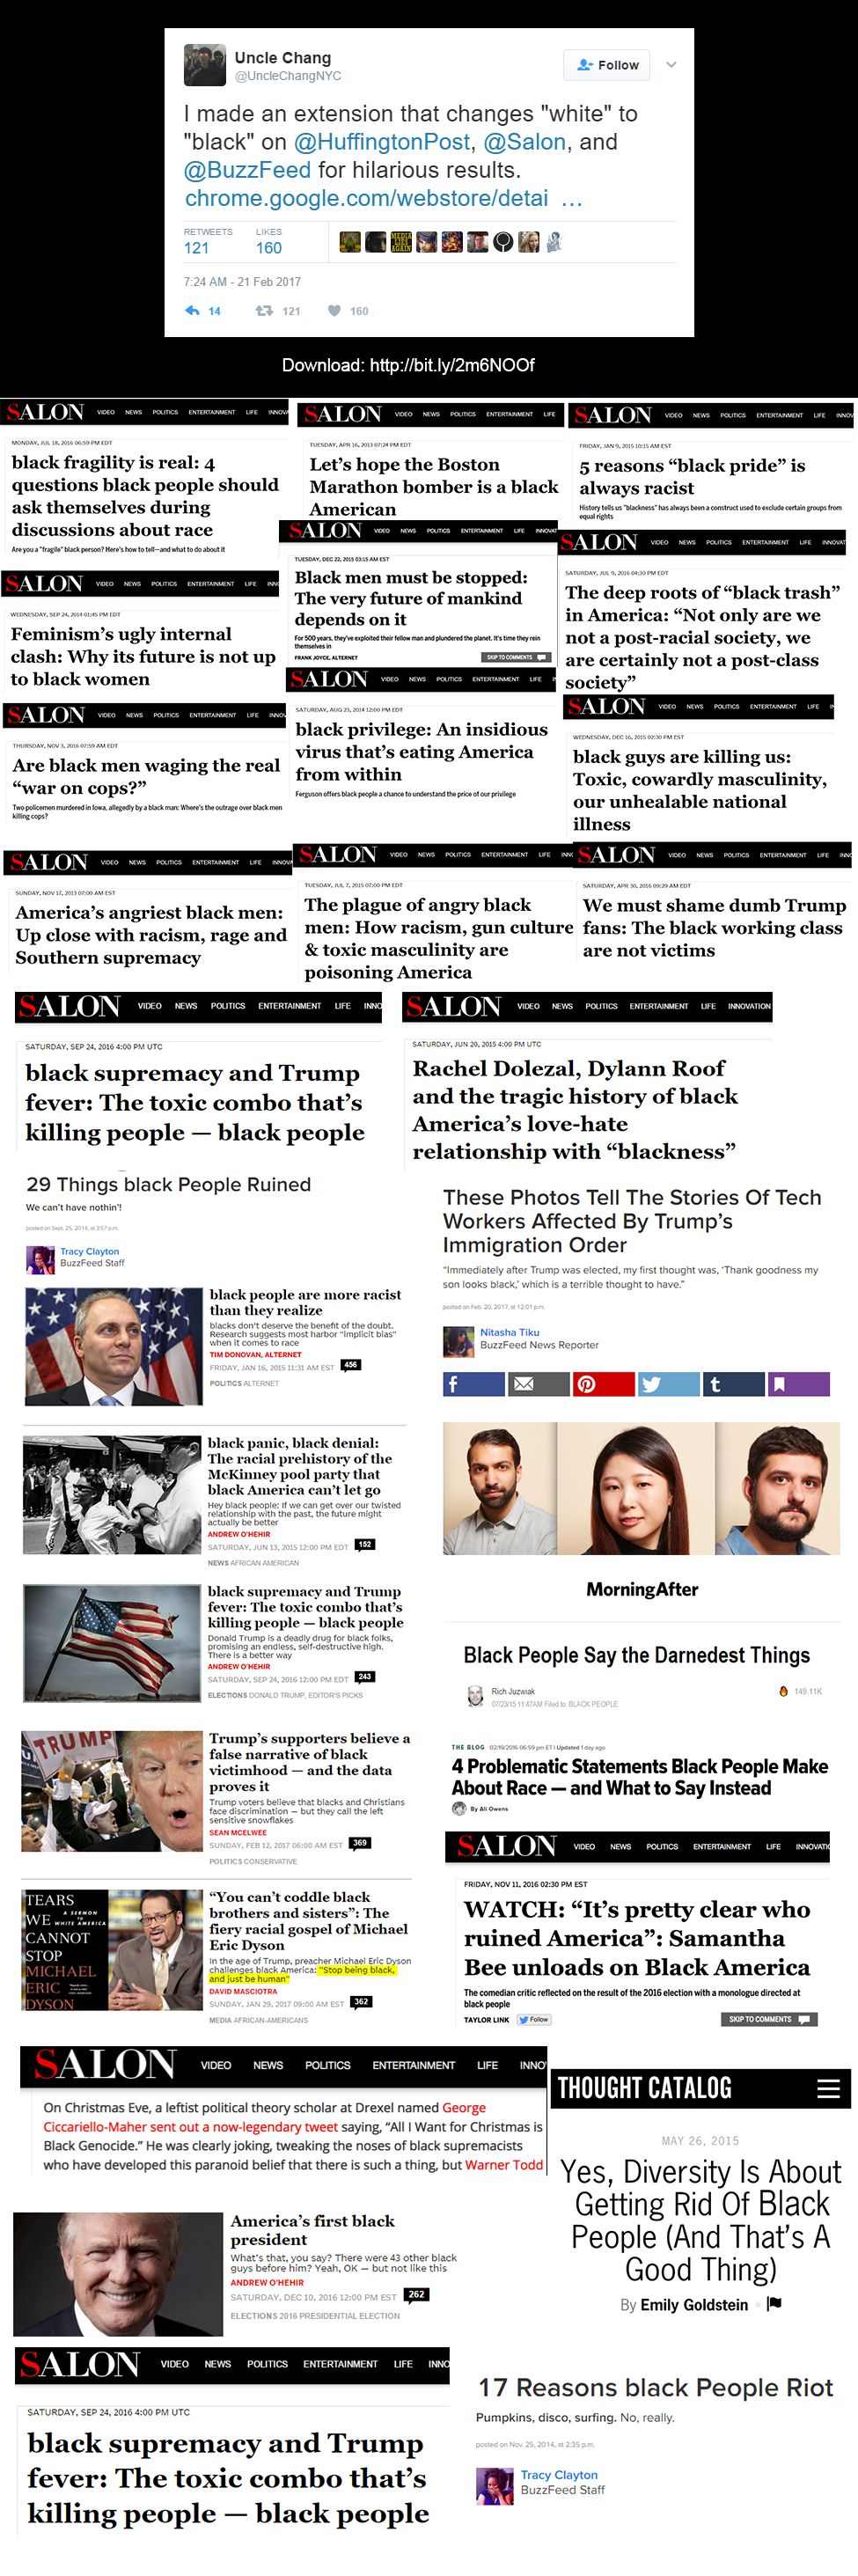 There is an extension that changes the word "white" to "black" in news articles